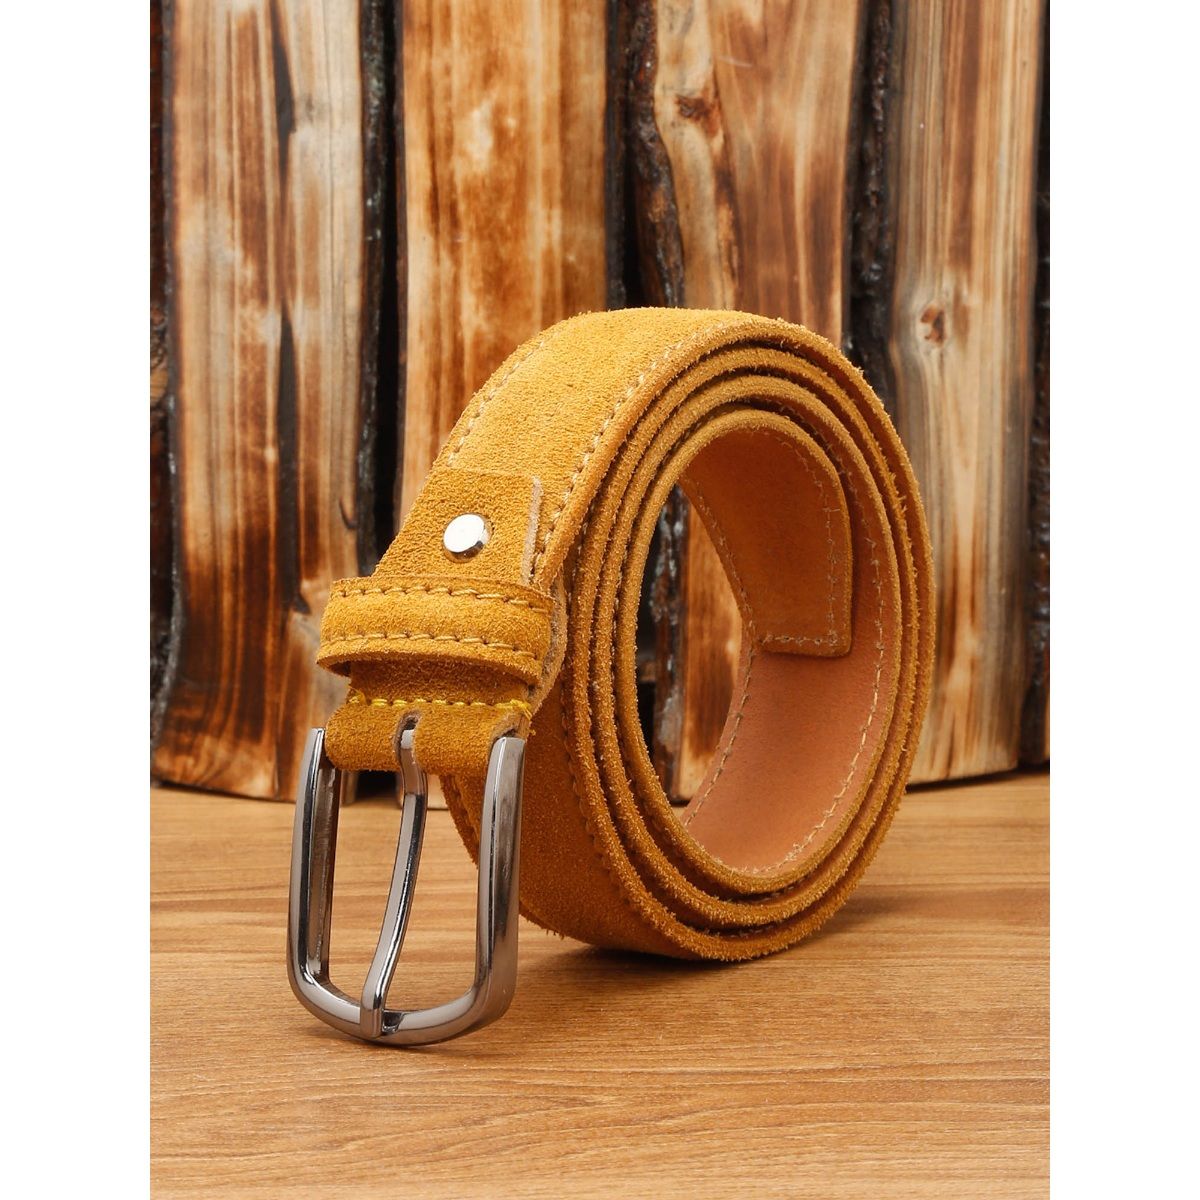 Buy LOUIS STITCH Men's Italian Leather Belt For Men's With